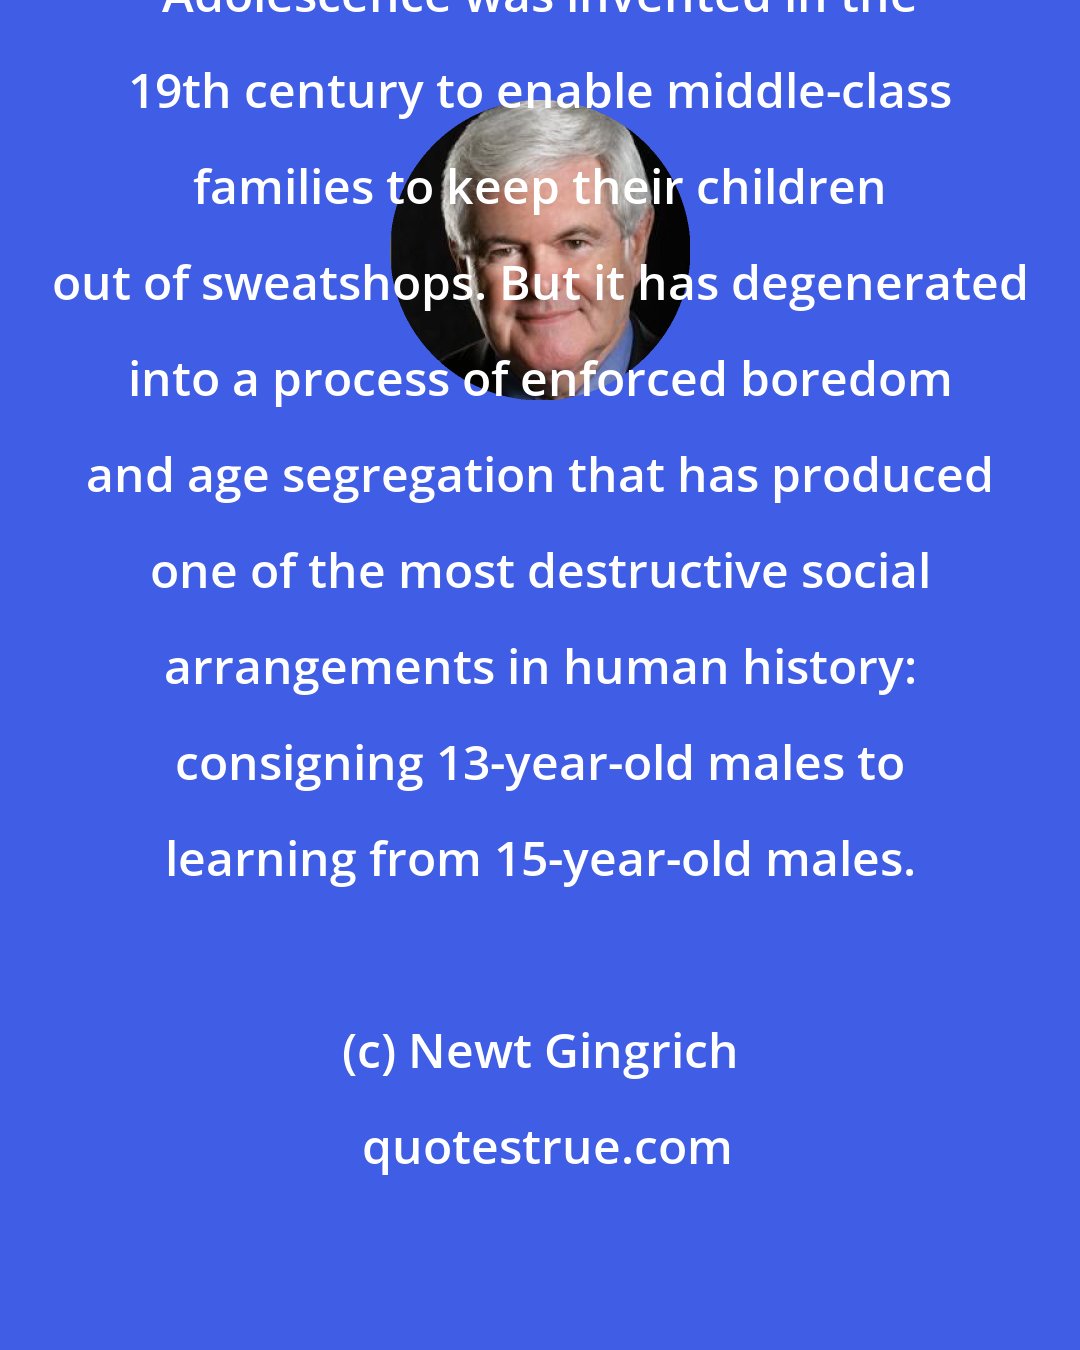 Newt Gingrich: Adolescence was invented in the 19th century to enable middle-class families to keep their children out of sweatshops. But it has degenerated into a process of enforced boredom and age segregation that has produced one of the most destructive social arrangements in human history: consigning 13-year-old males to learning from 15-year-old males.